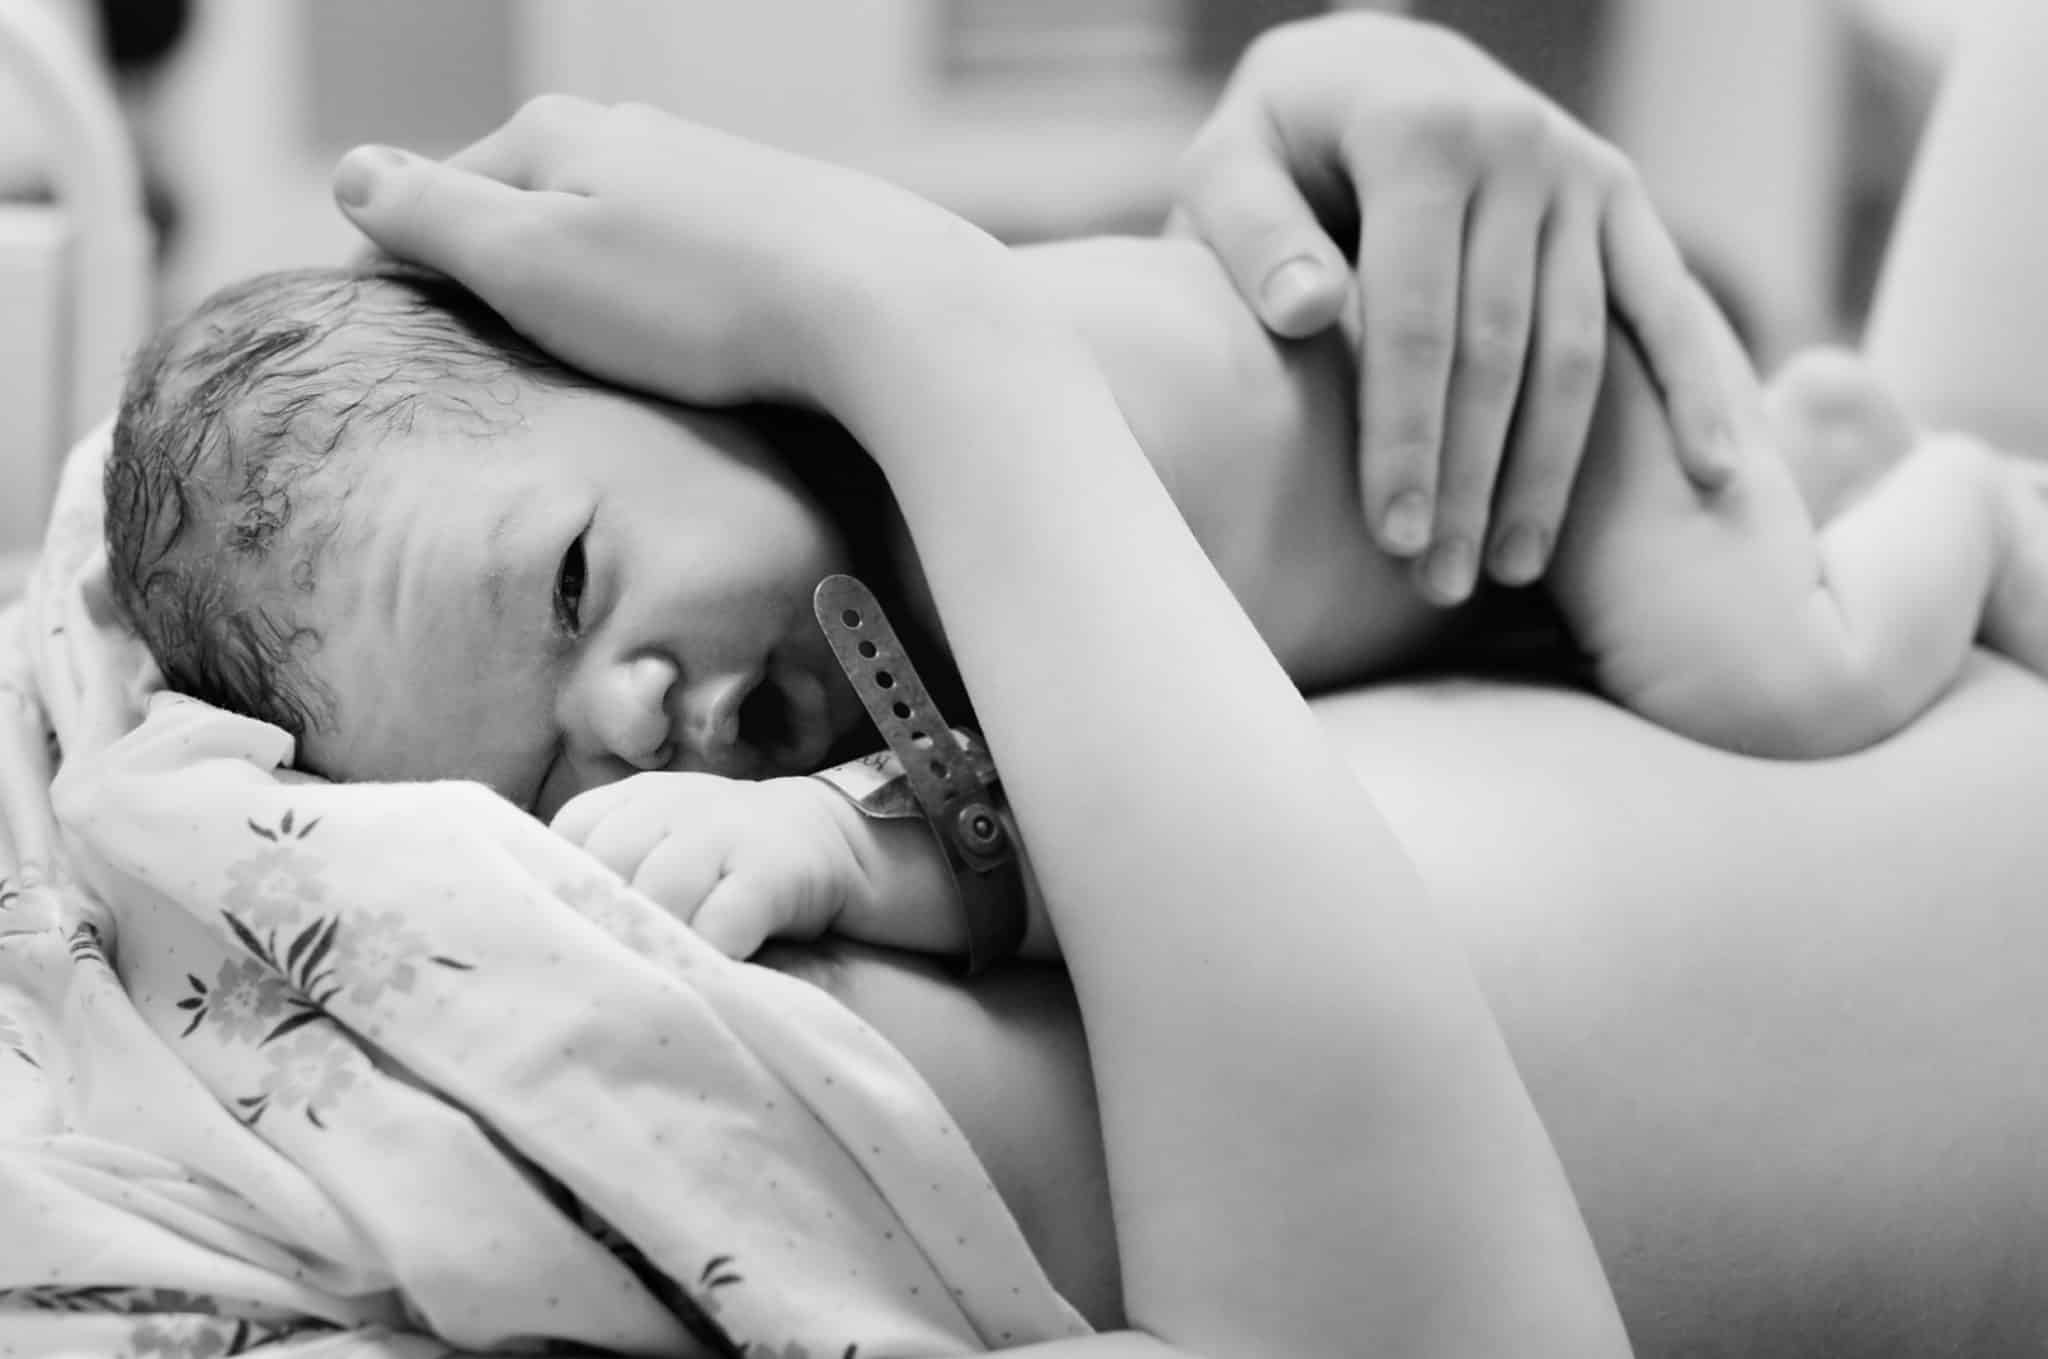 Black and white shot of newborn baby right after delivery